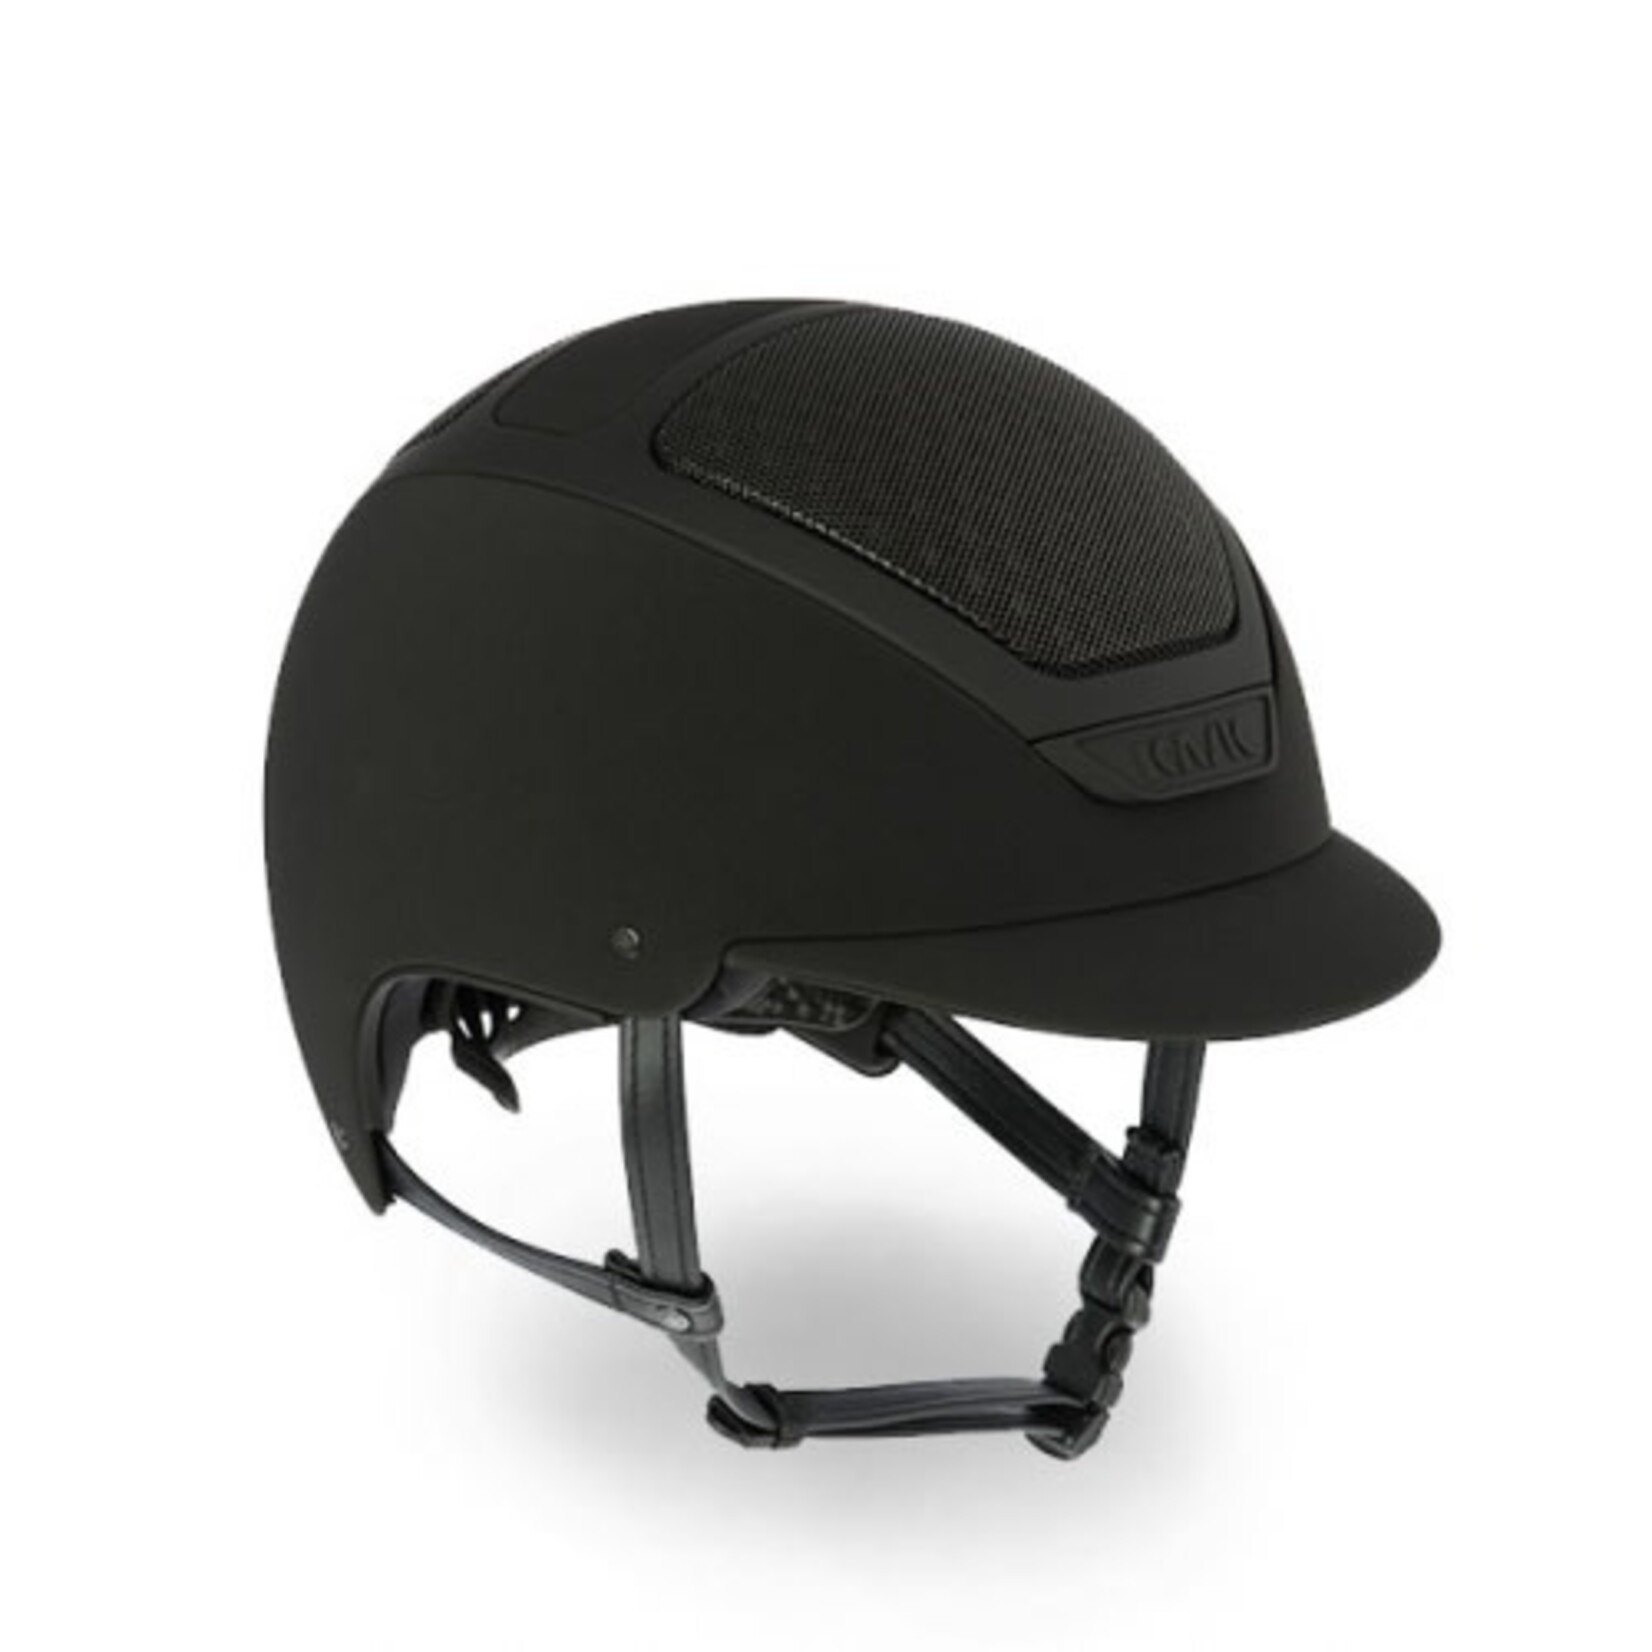 KASK Equestrian Kask WG11 Dogma Hunter Riding Helmet- Sold as a kit with coordinating liner (sold separately)